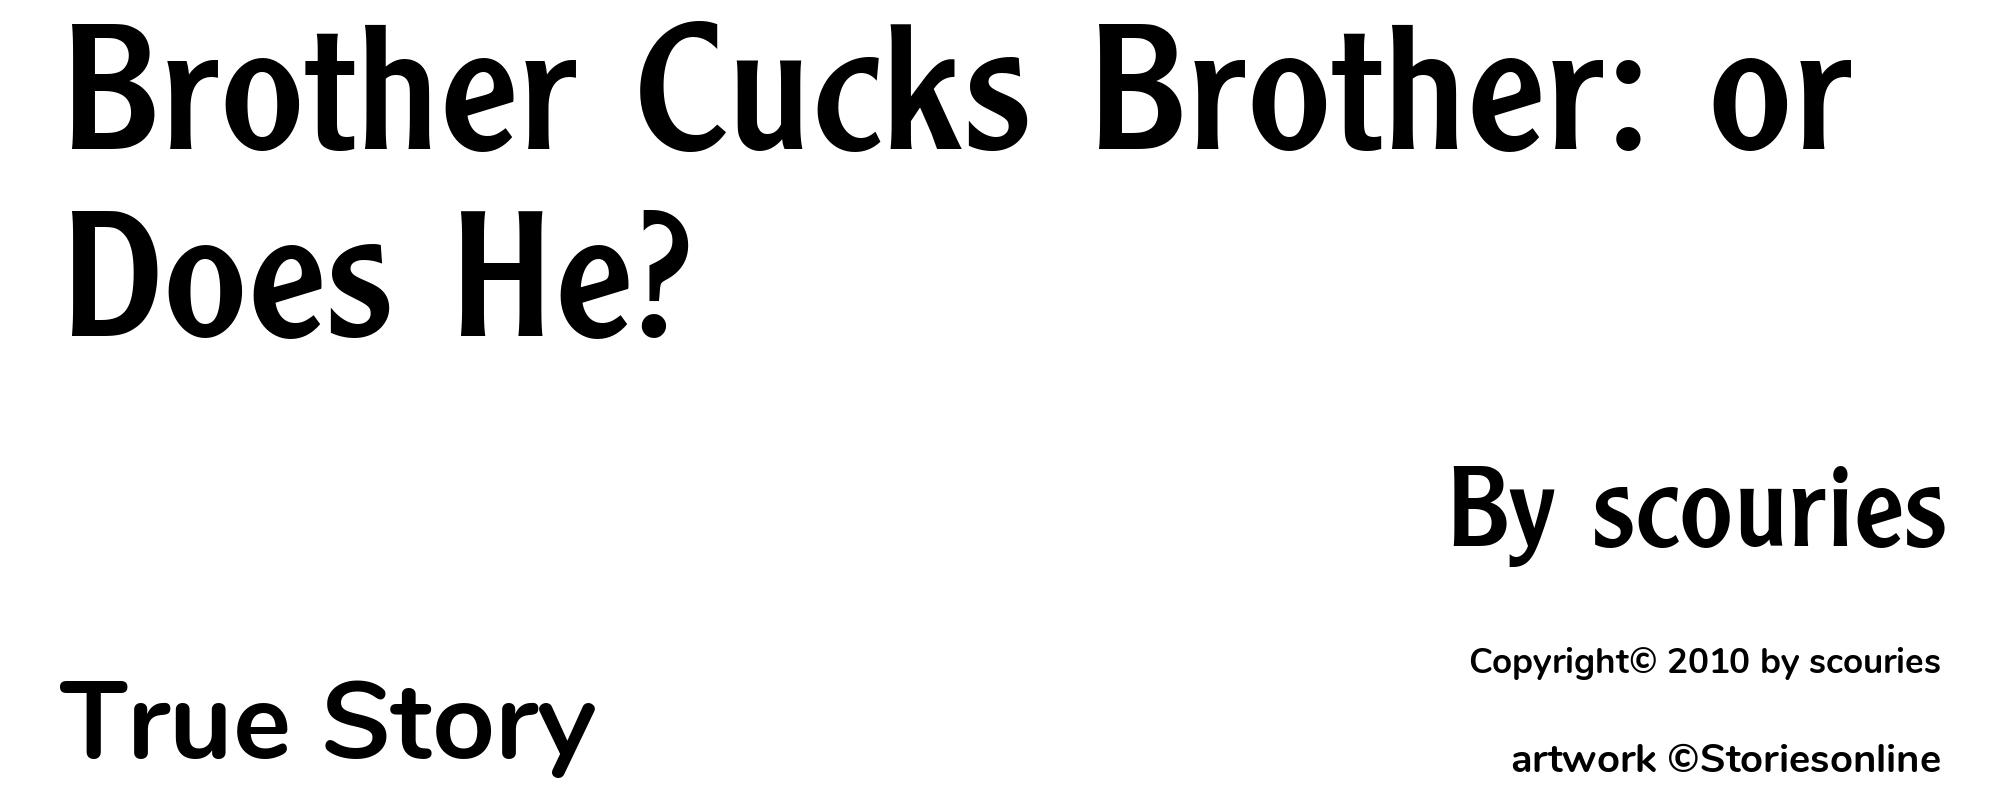 Brother Cucks Brother: or Does He? - Cover